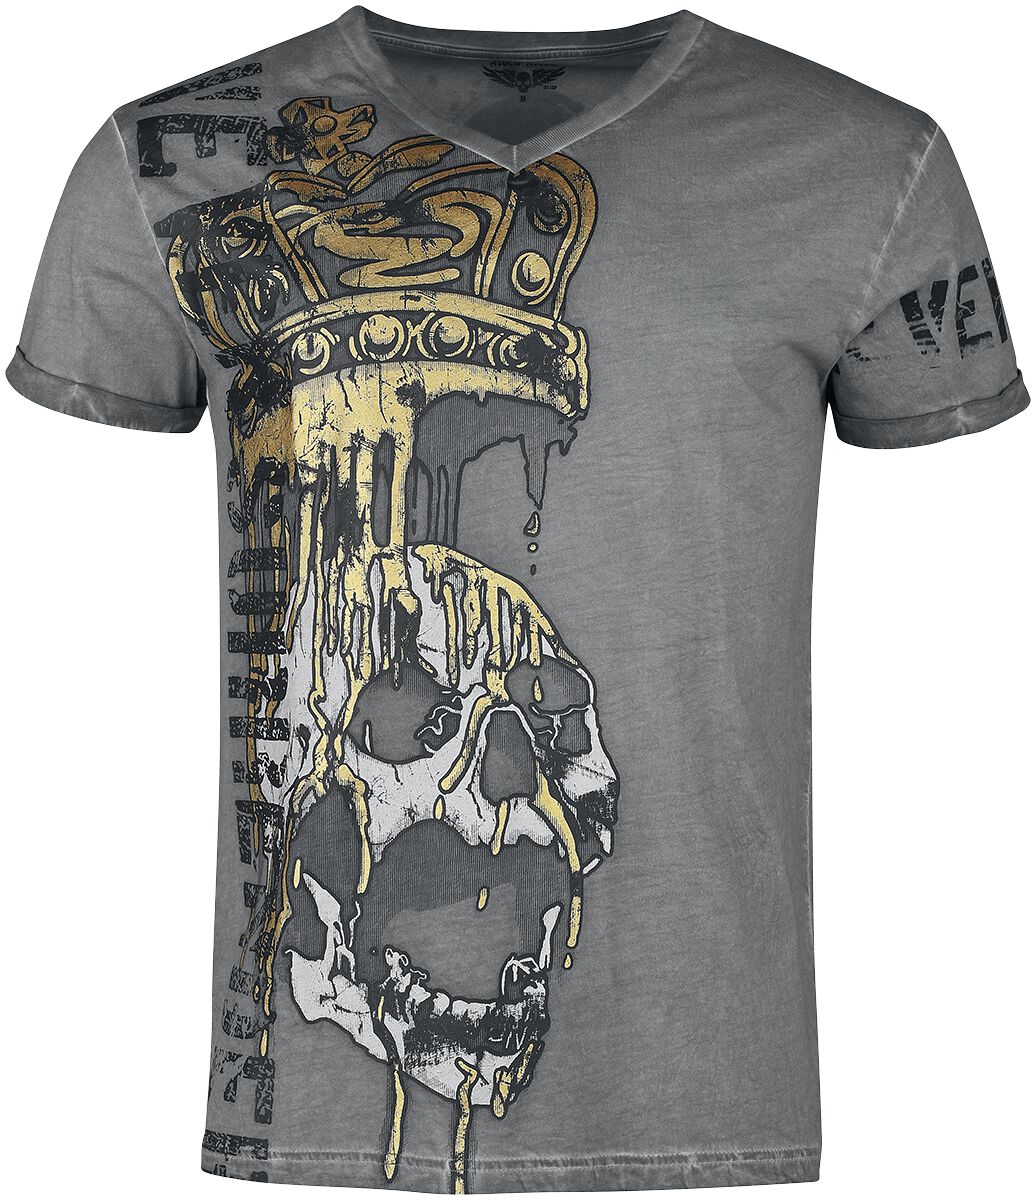 Image of T-Shirt di Rock Rebel by EMP - T-shirt with skull and crown print - M a XL - Uomo - grigio